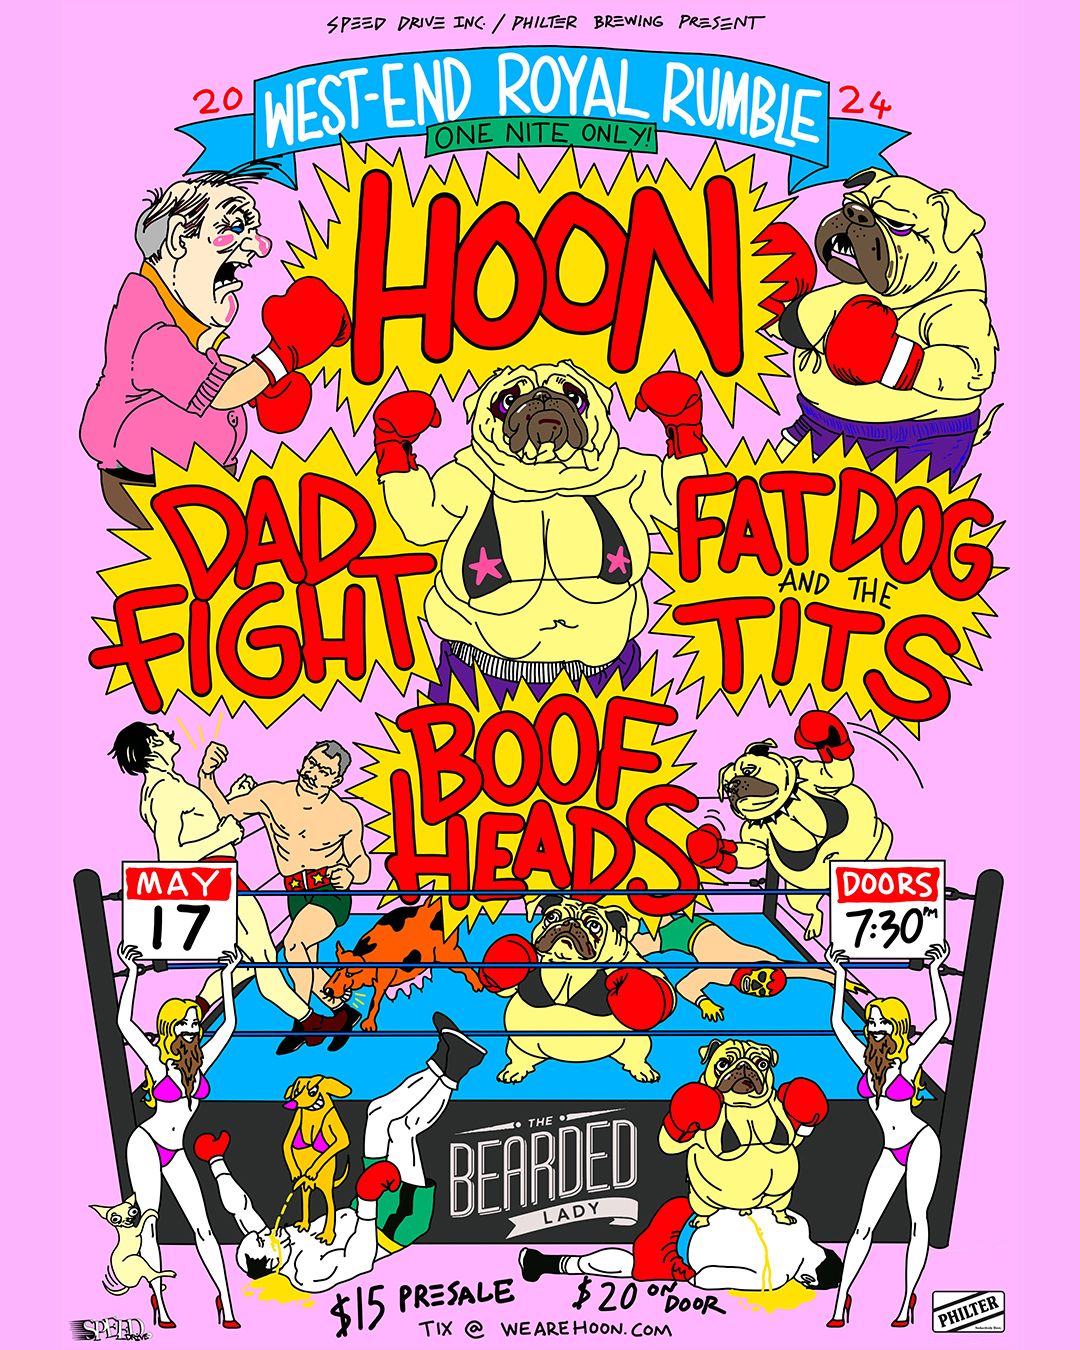 HOON + DAD FIGHT + FAT DOG + BOOF HEADS at The Bearded Lady